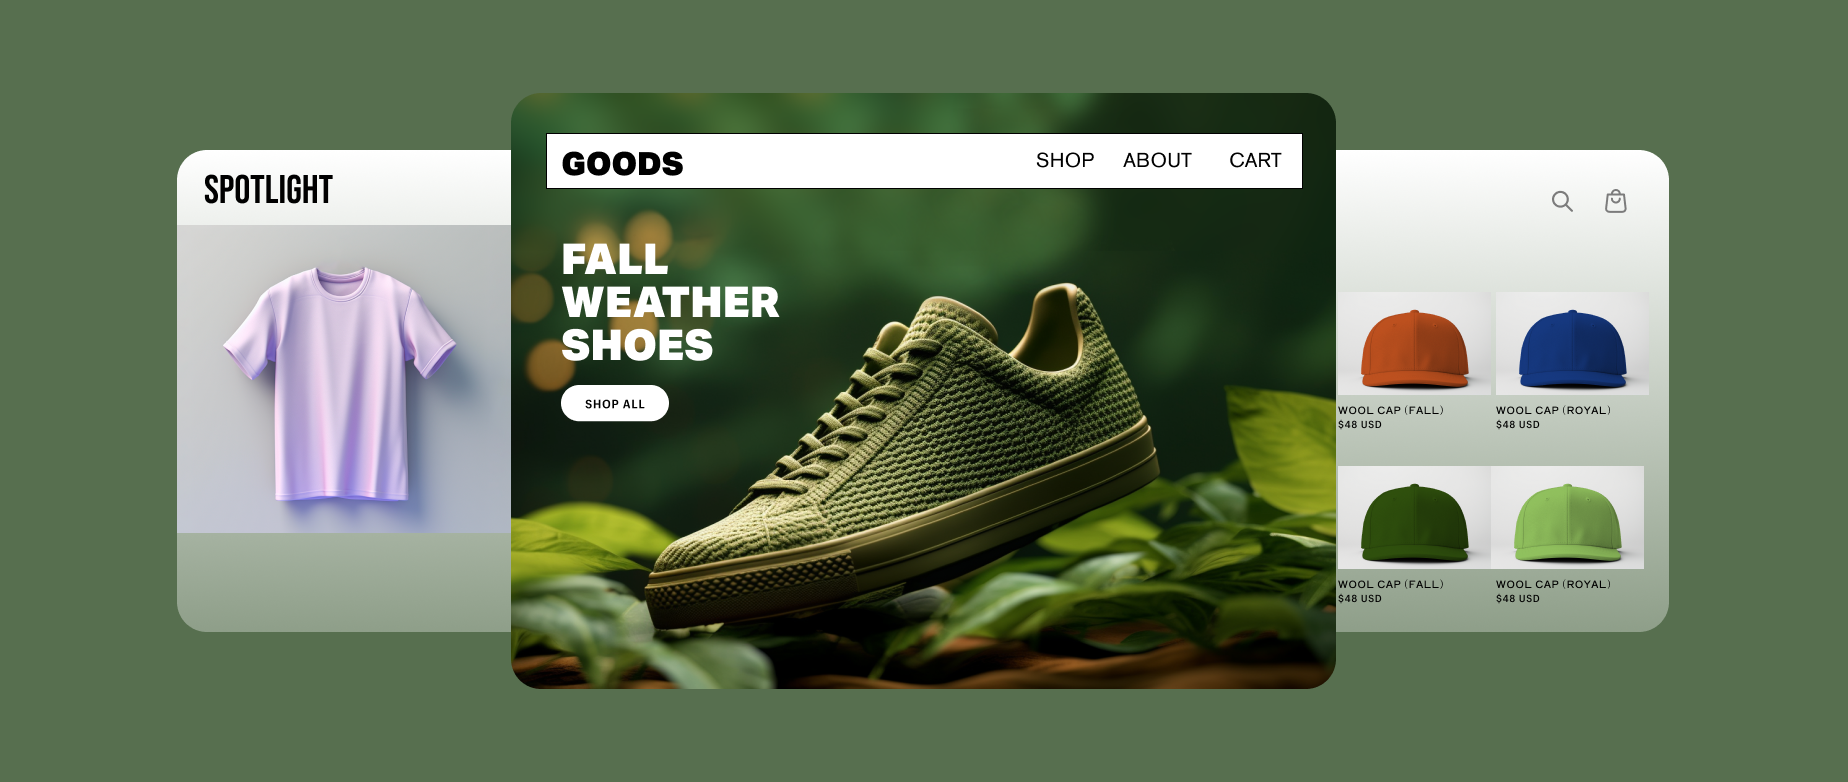 Three browser windows showing demos of best shopify ecommerce theme designs